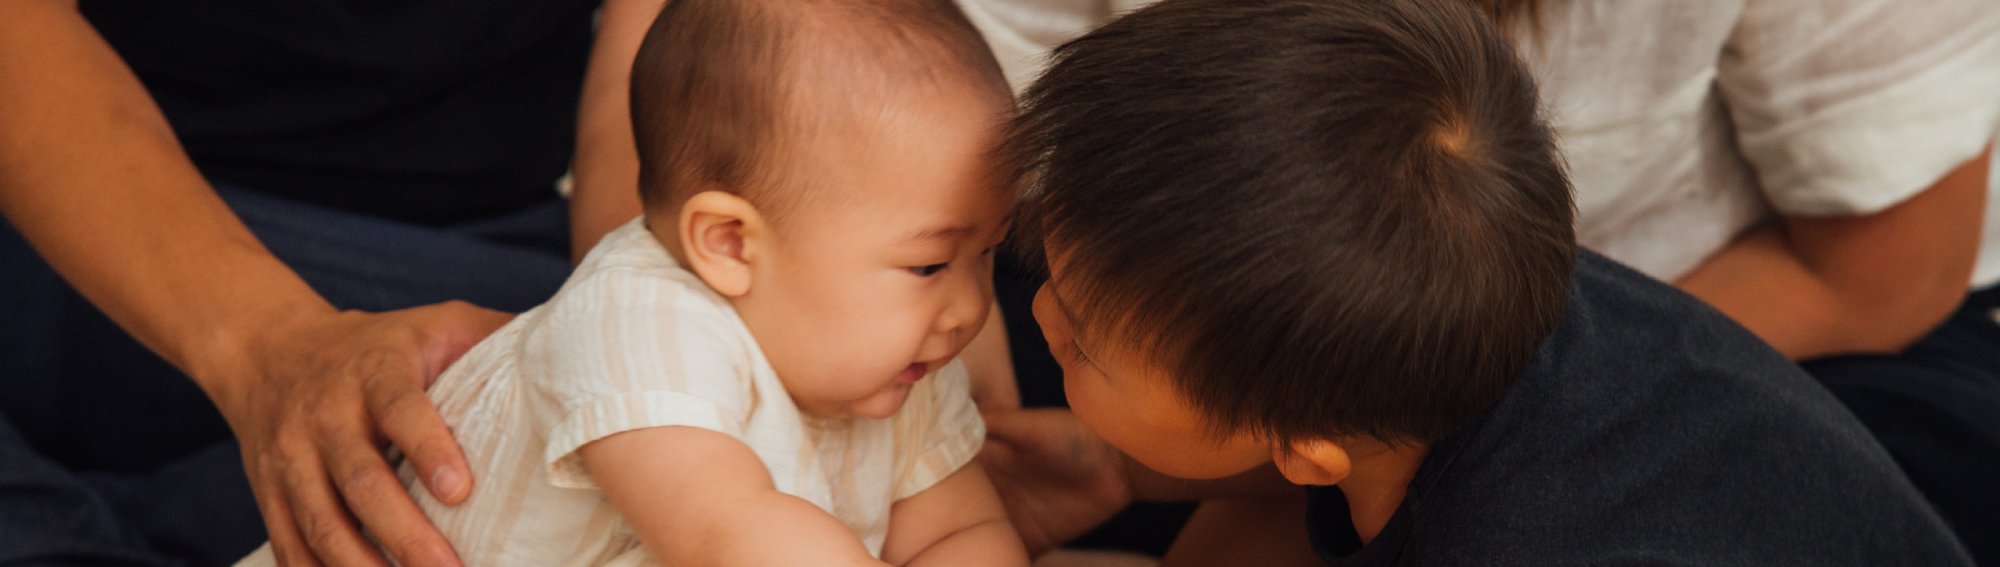 How to Prep Your Toddler for a New Baby Sibling